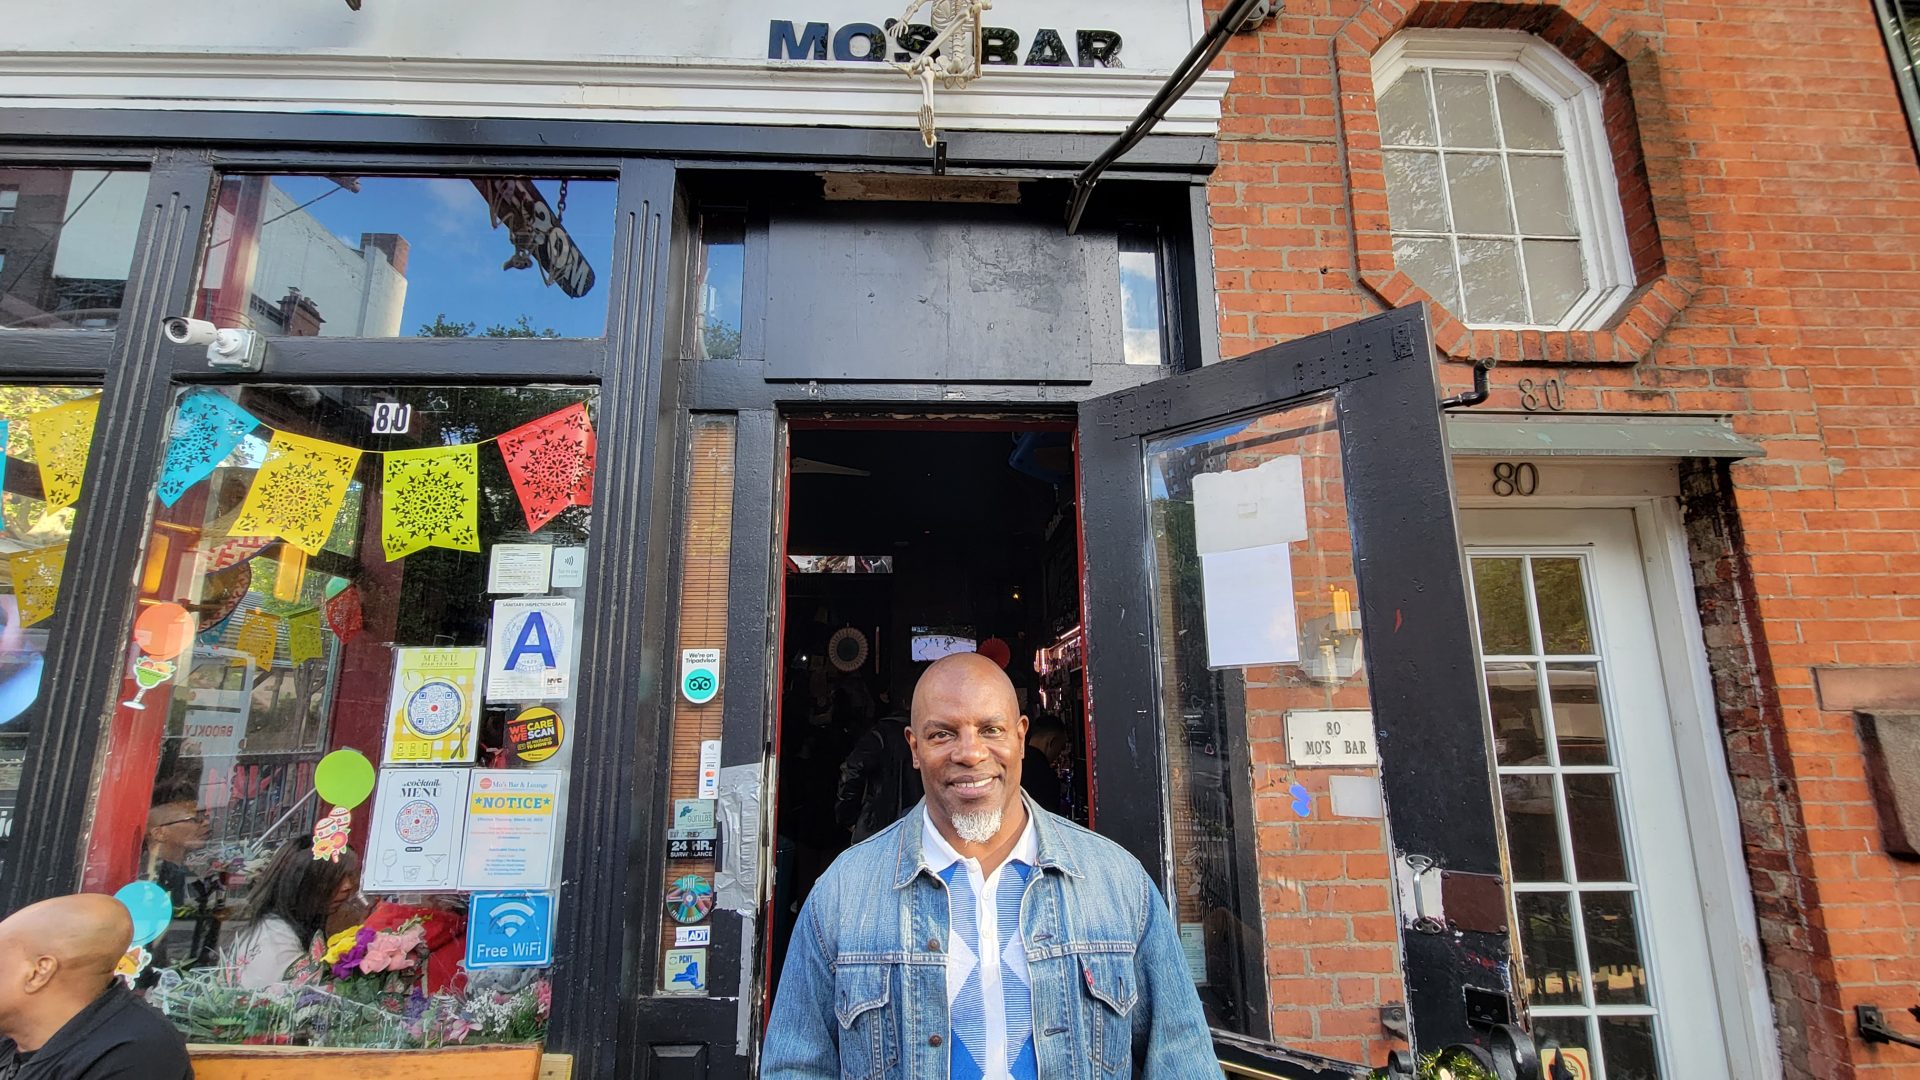 Calvin Clark, owner of Mo's Bar and Lounge. (Photo by Derrel Jazz Johnson for rolling out)